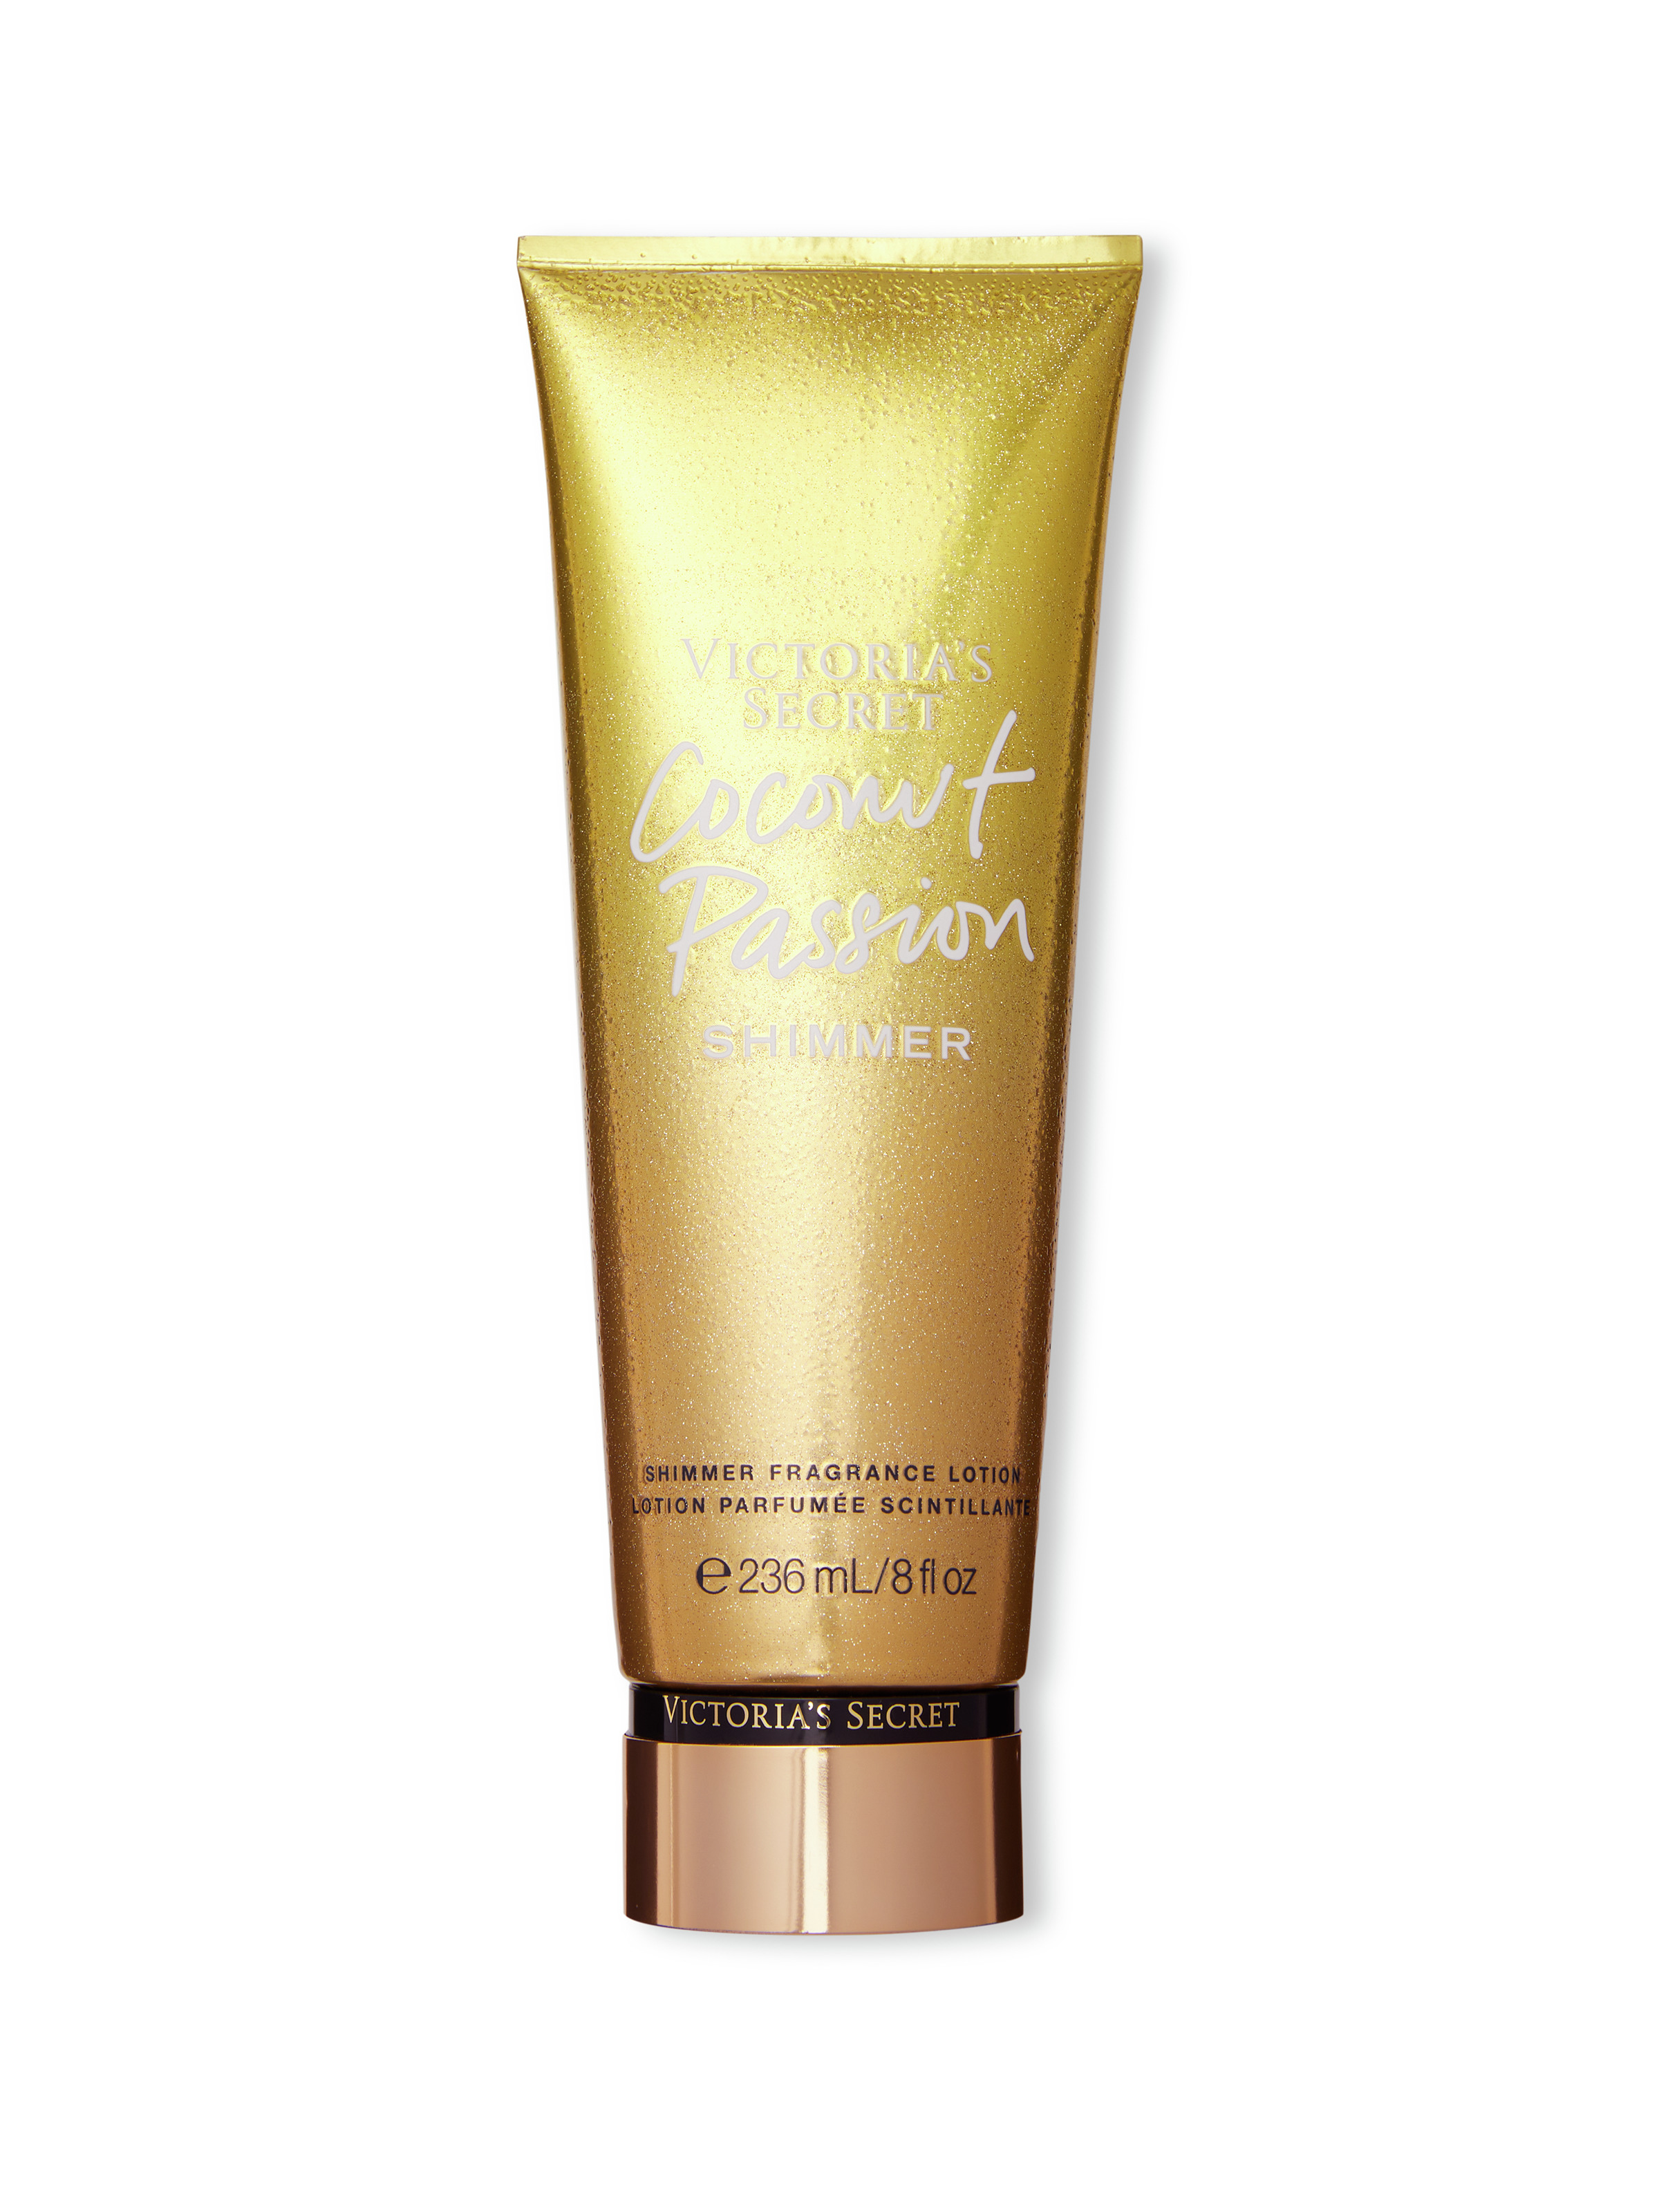 Coconut Passion Shimmer Fragrance Lotion